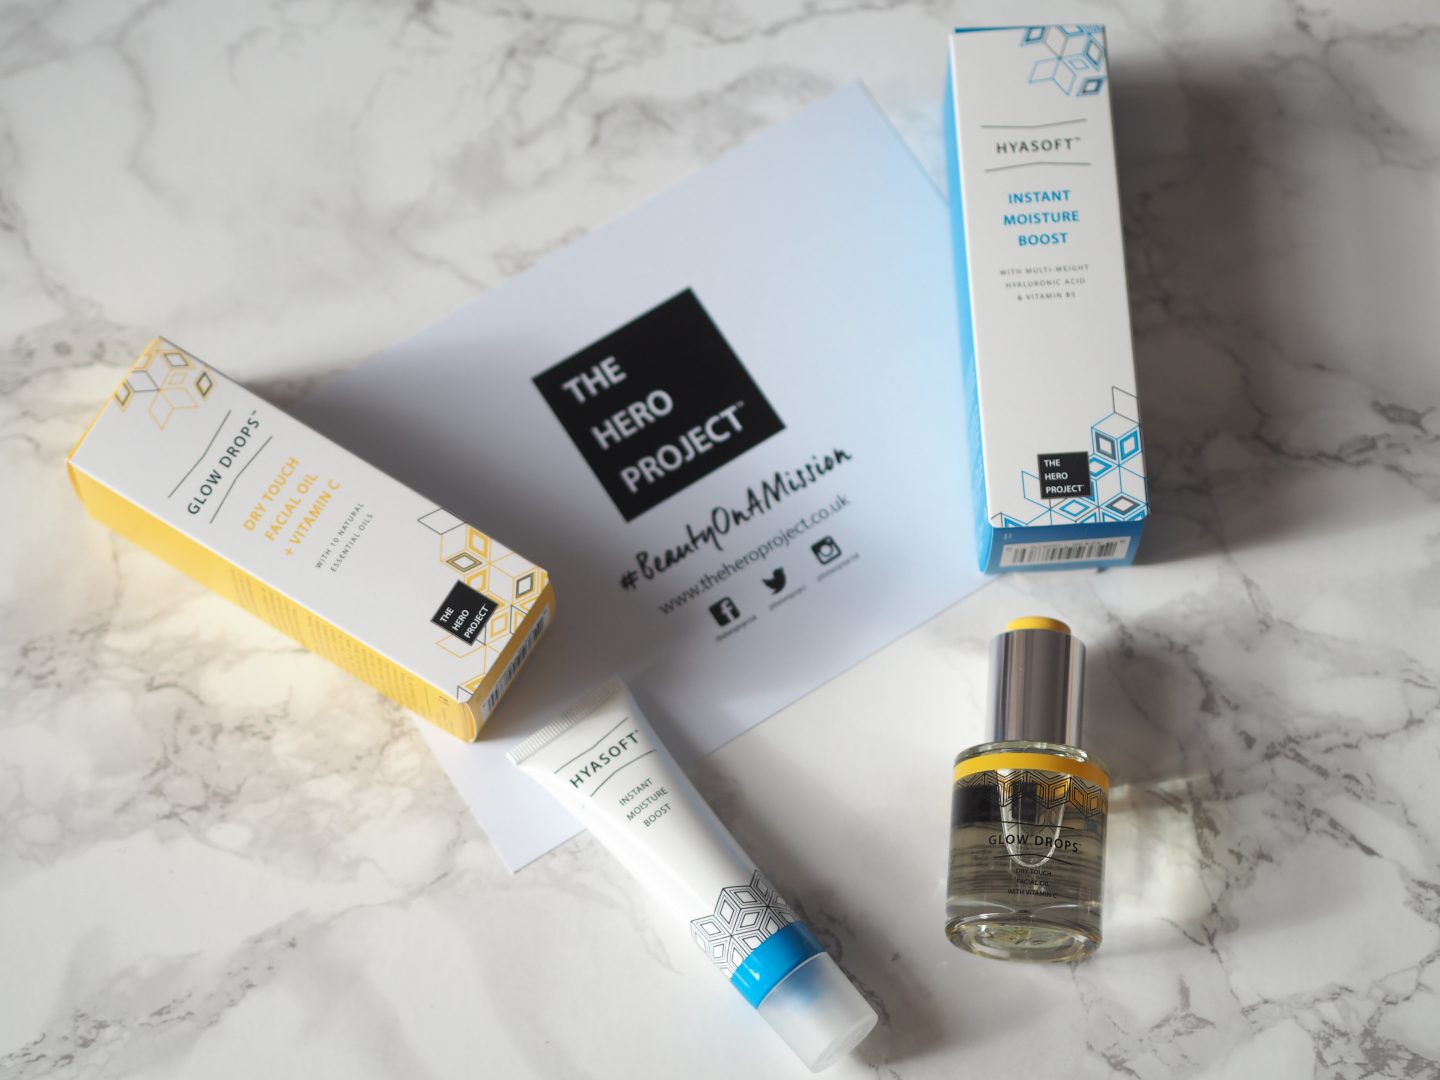 Beauty News: The Hero Project Launches in the UK!